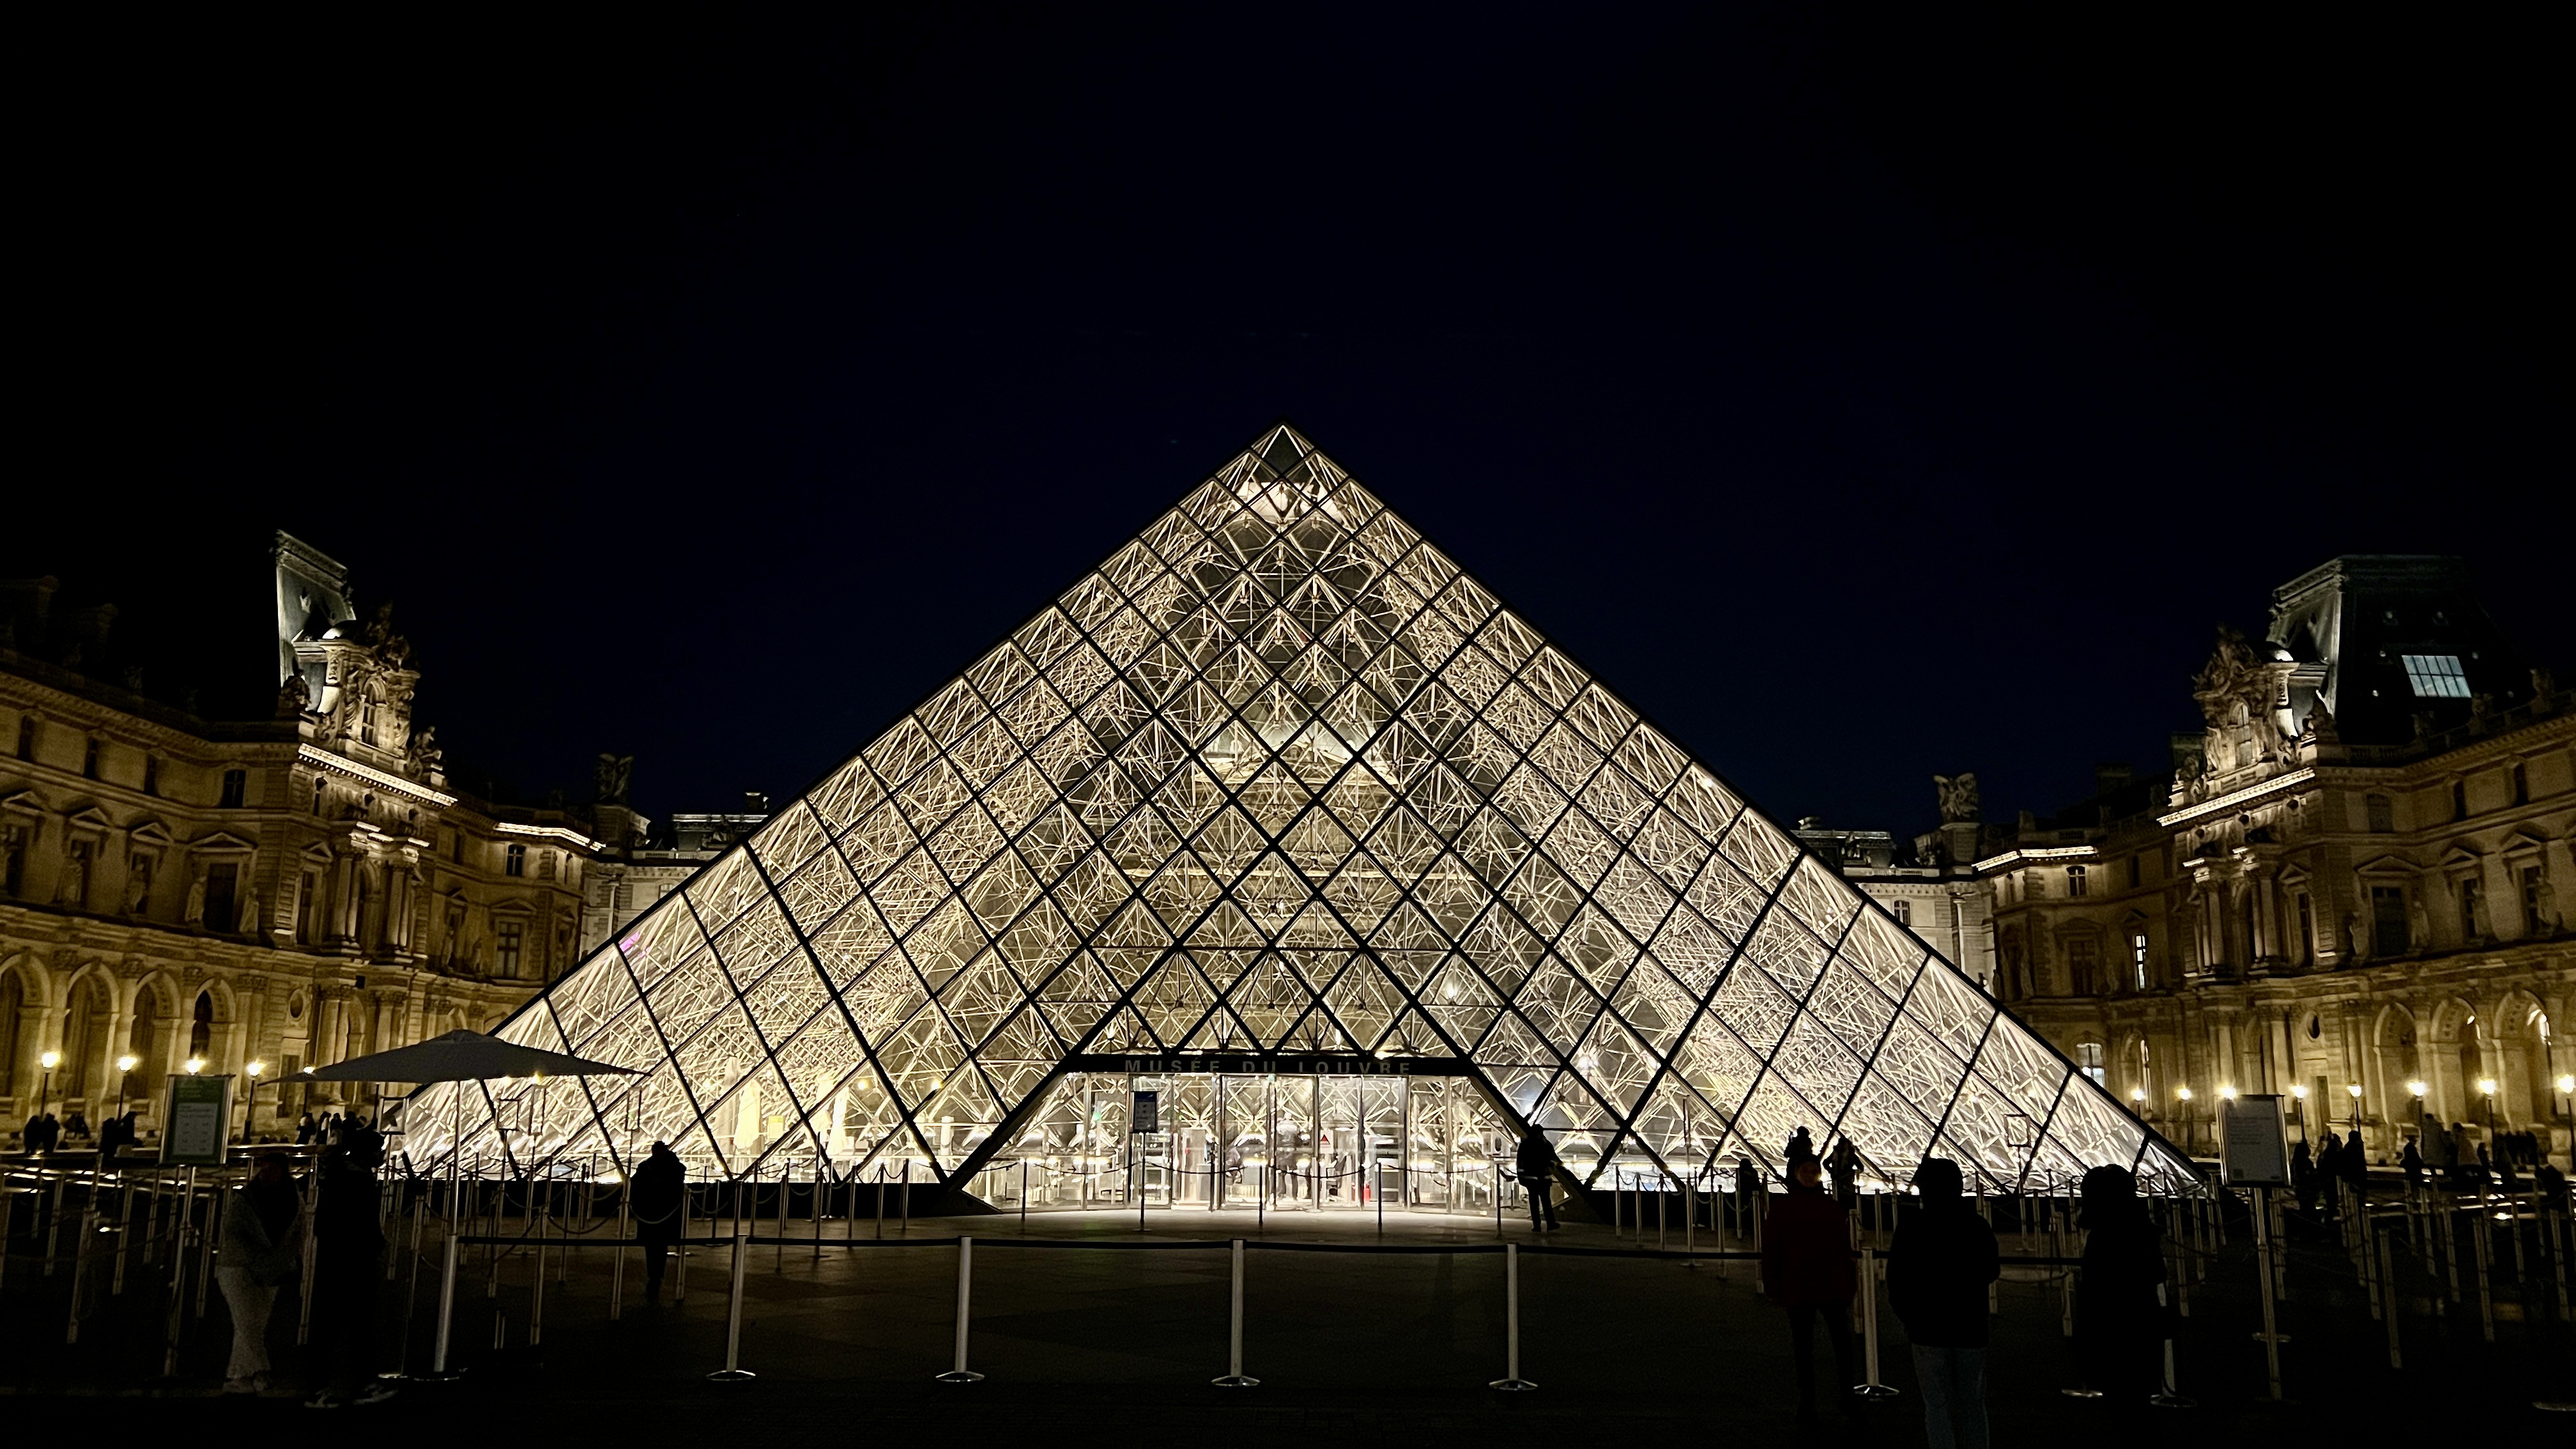 The Louvre at night with some putzes in the foreground.